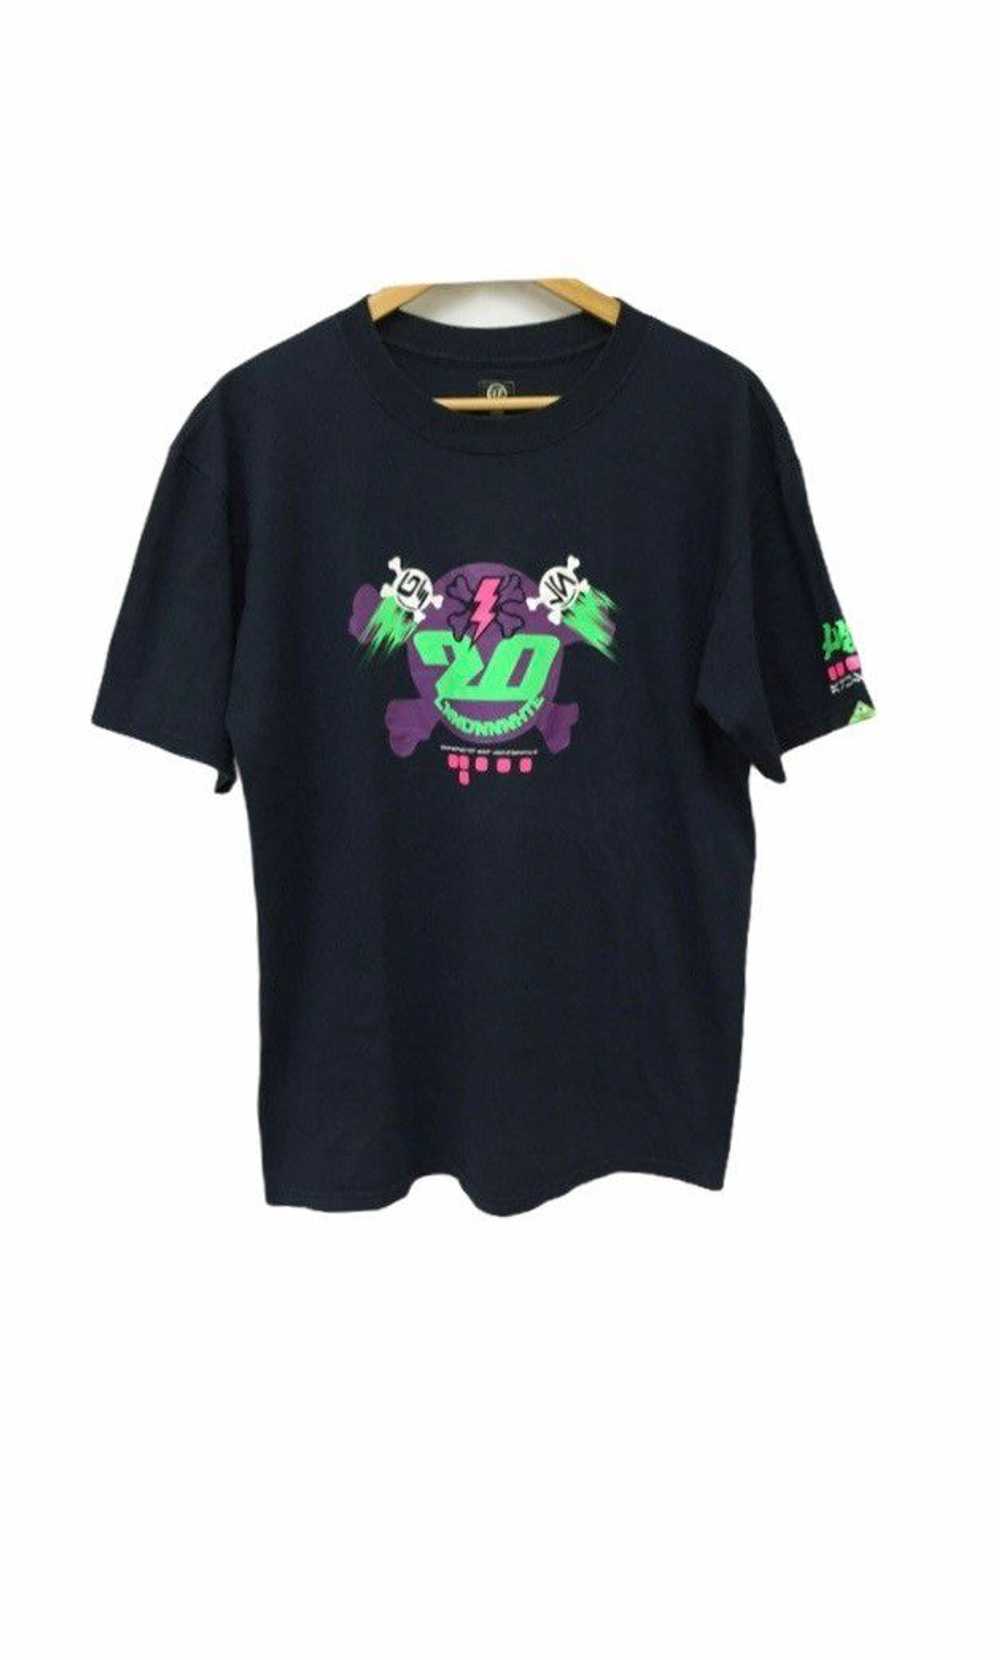 Undercover SS 2001 chaotic discord tee - image 1